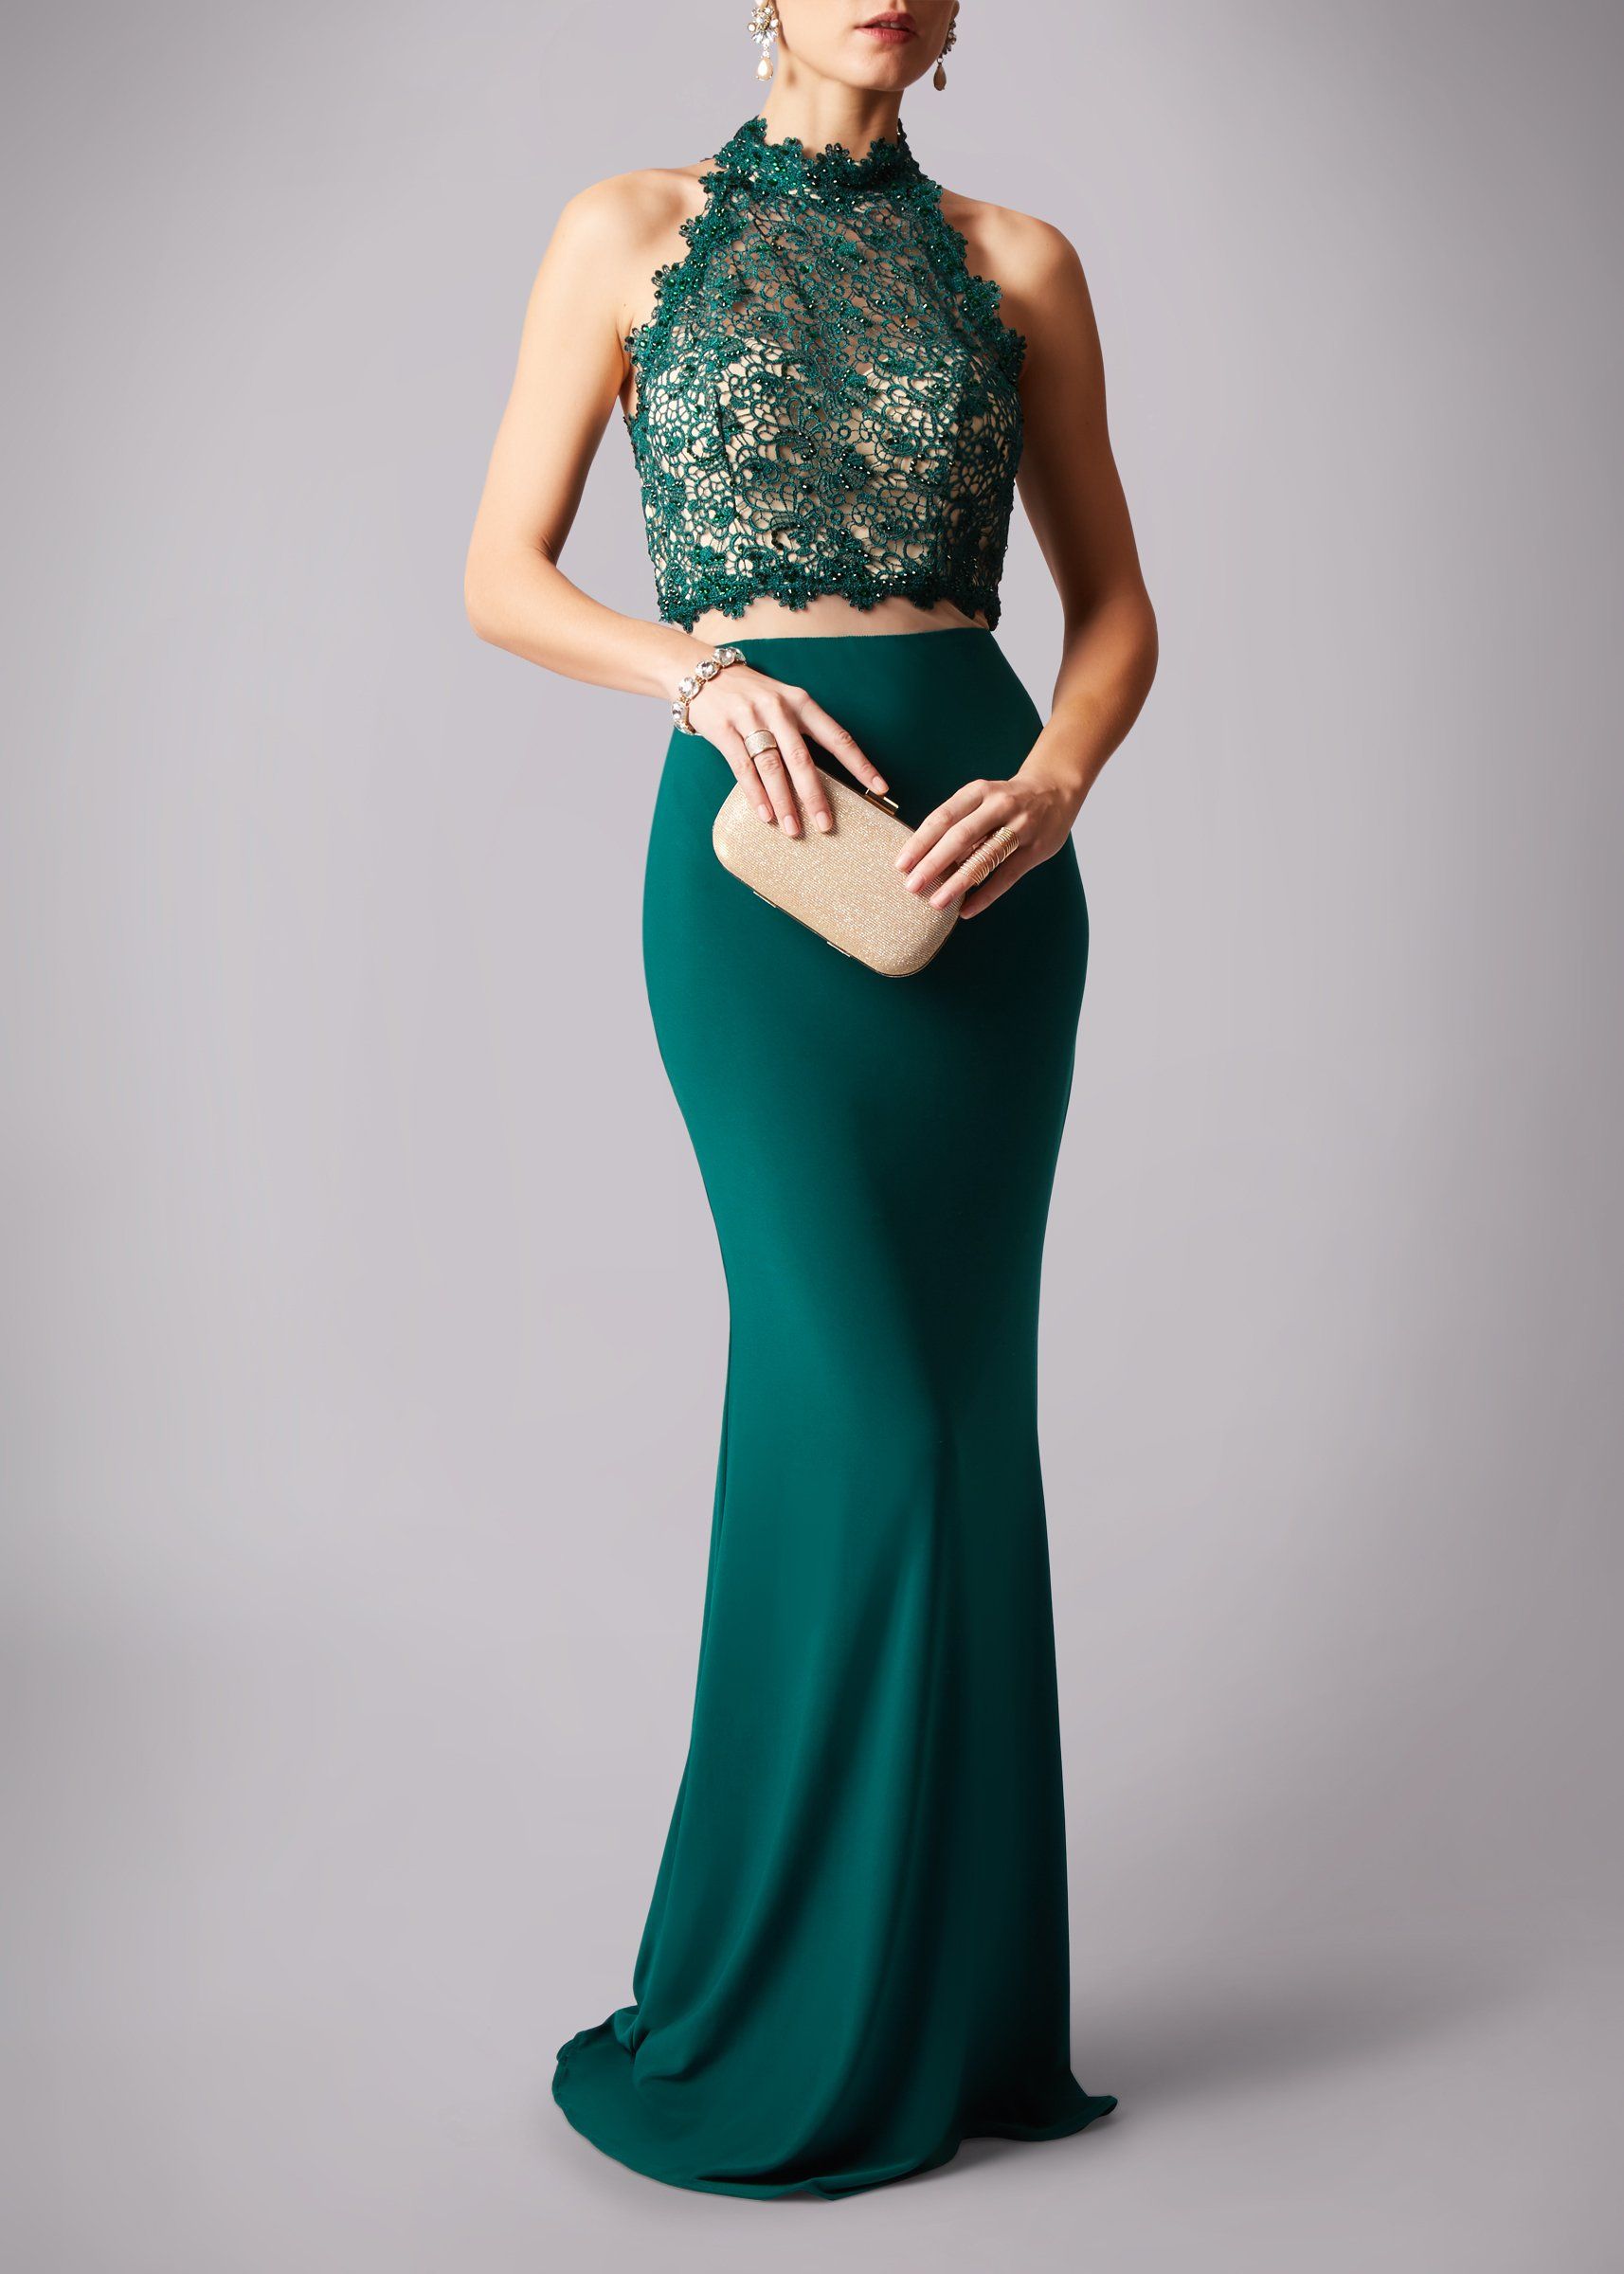 Stunning prom dresses from Charisma of Fawley